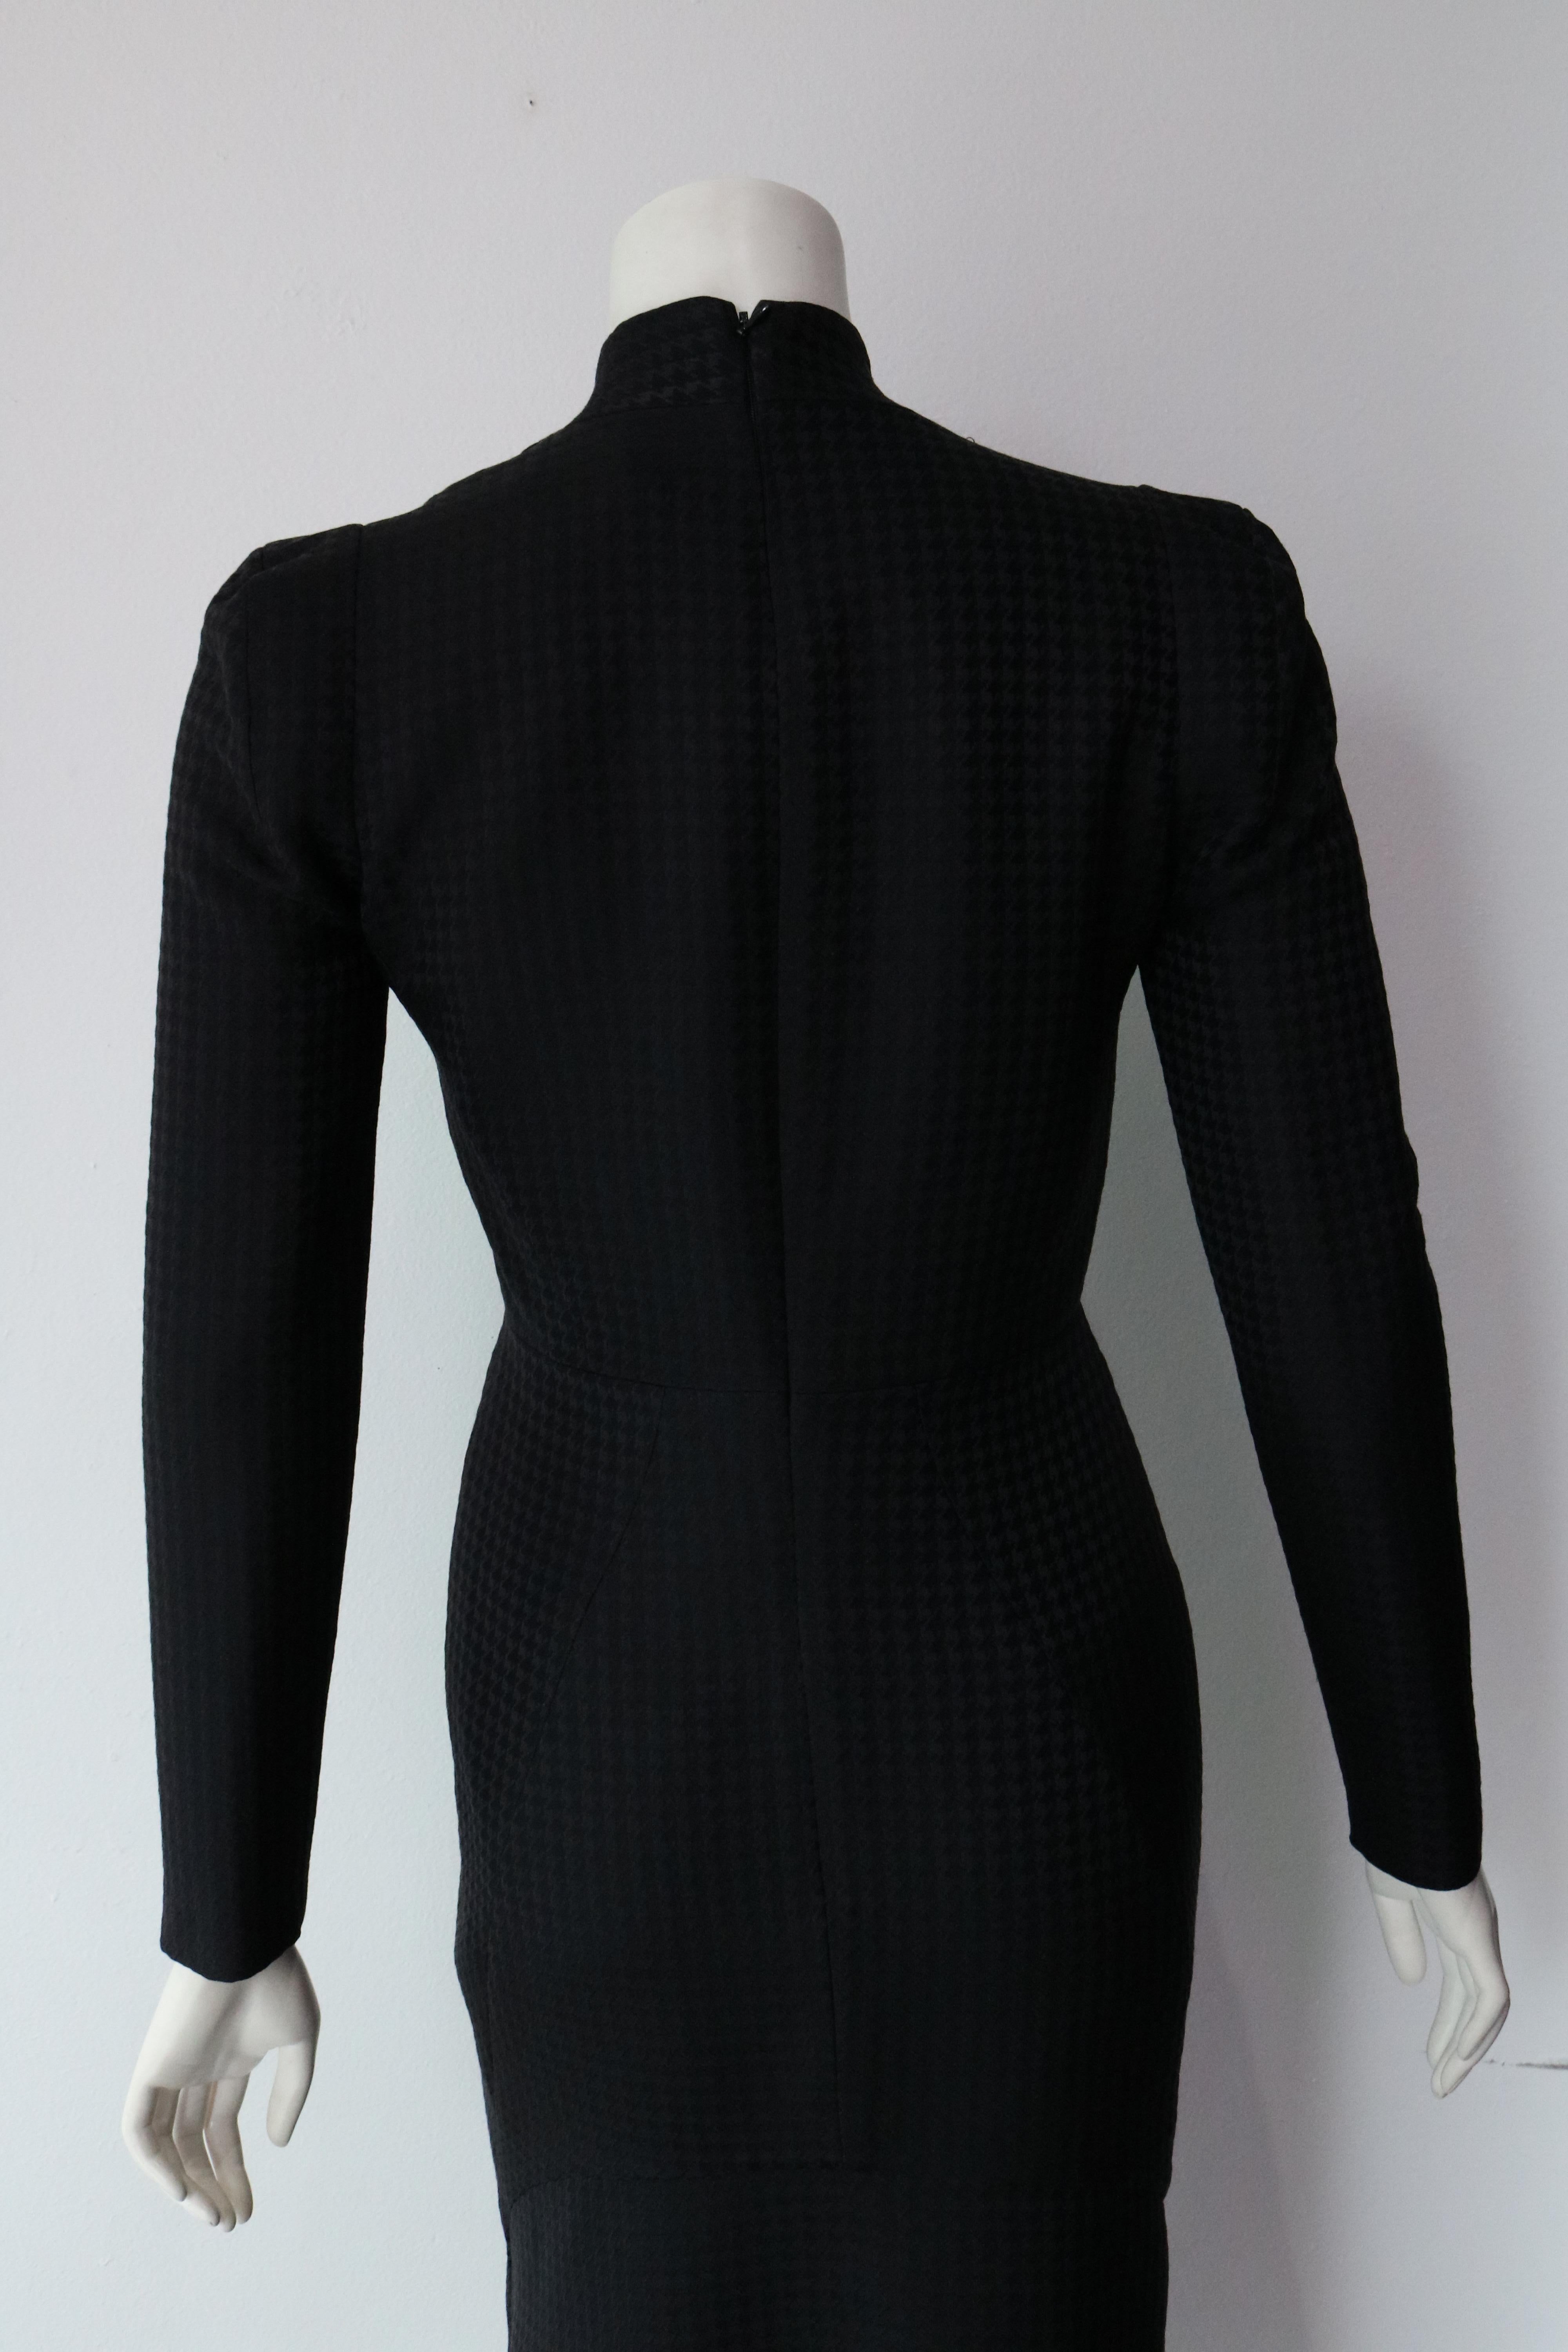 Black Gucci Cocktail Dress Houndstooth Print  Size 40